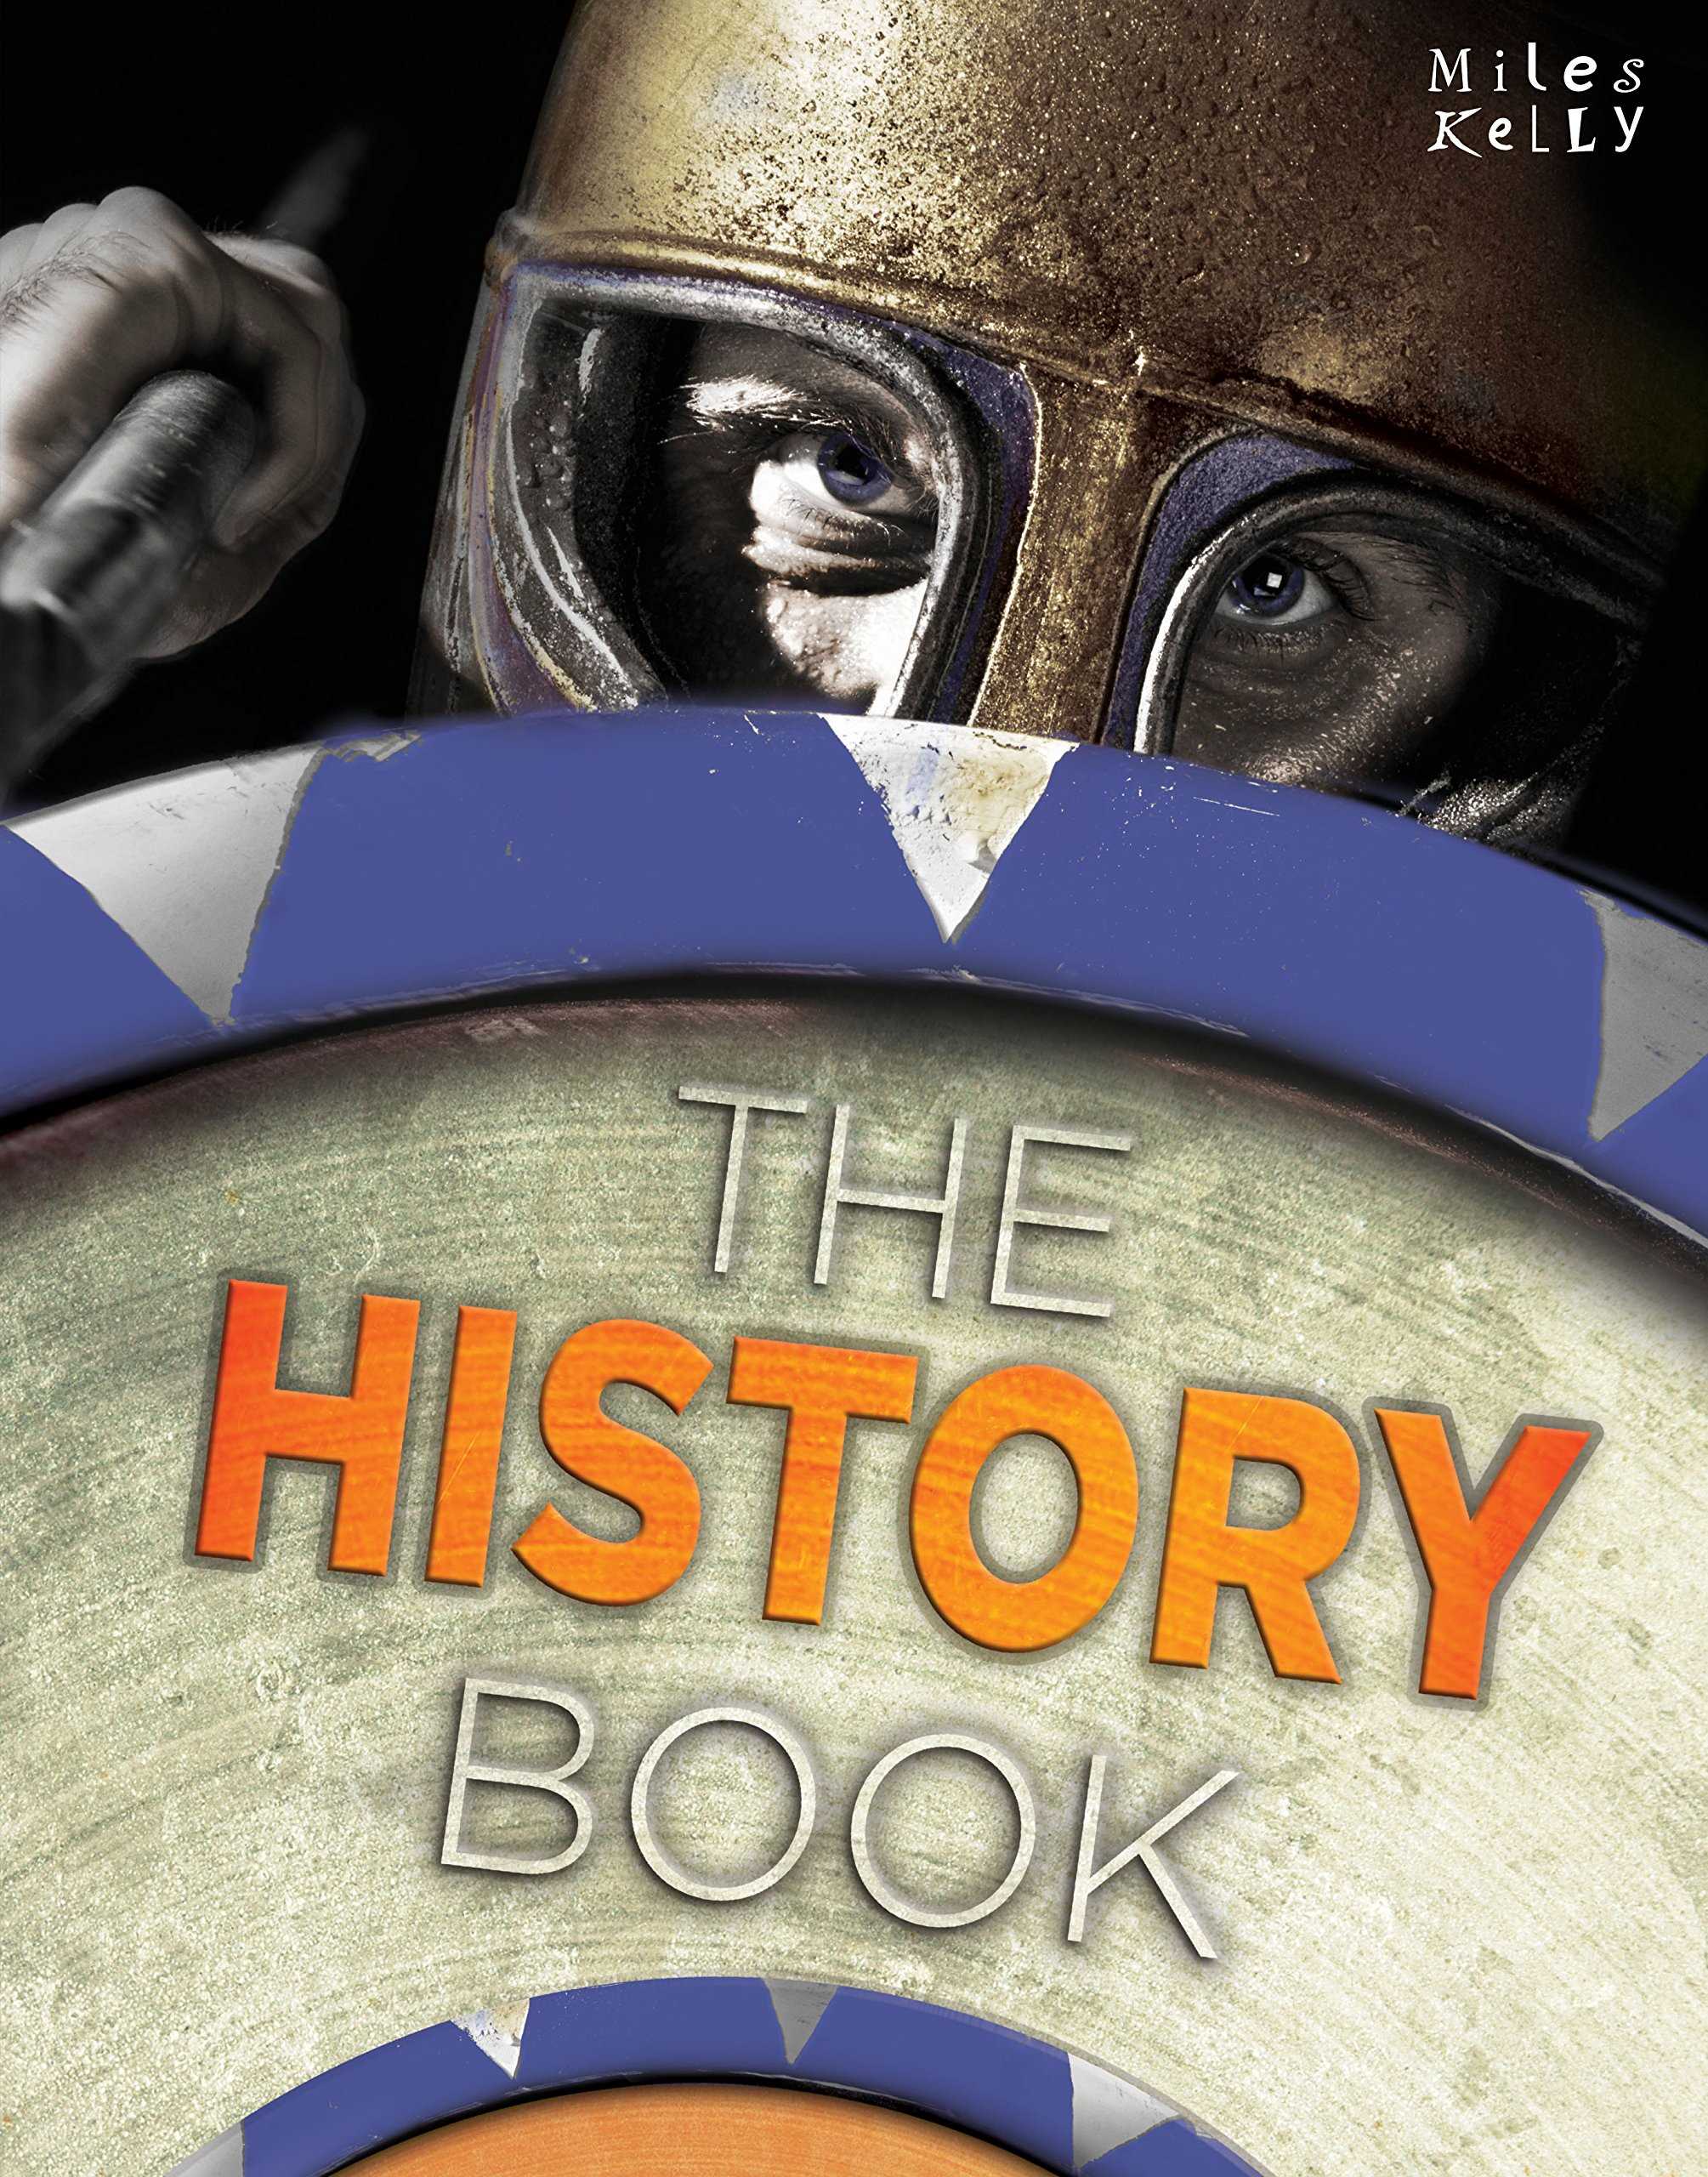 THE HISTORY BOOK